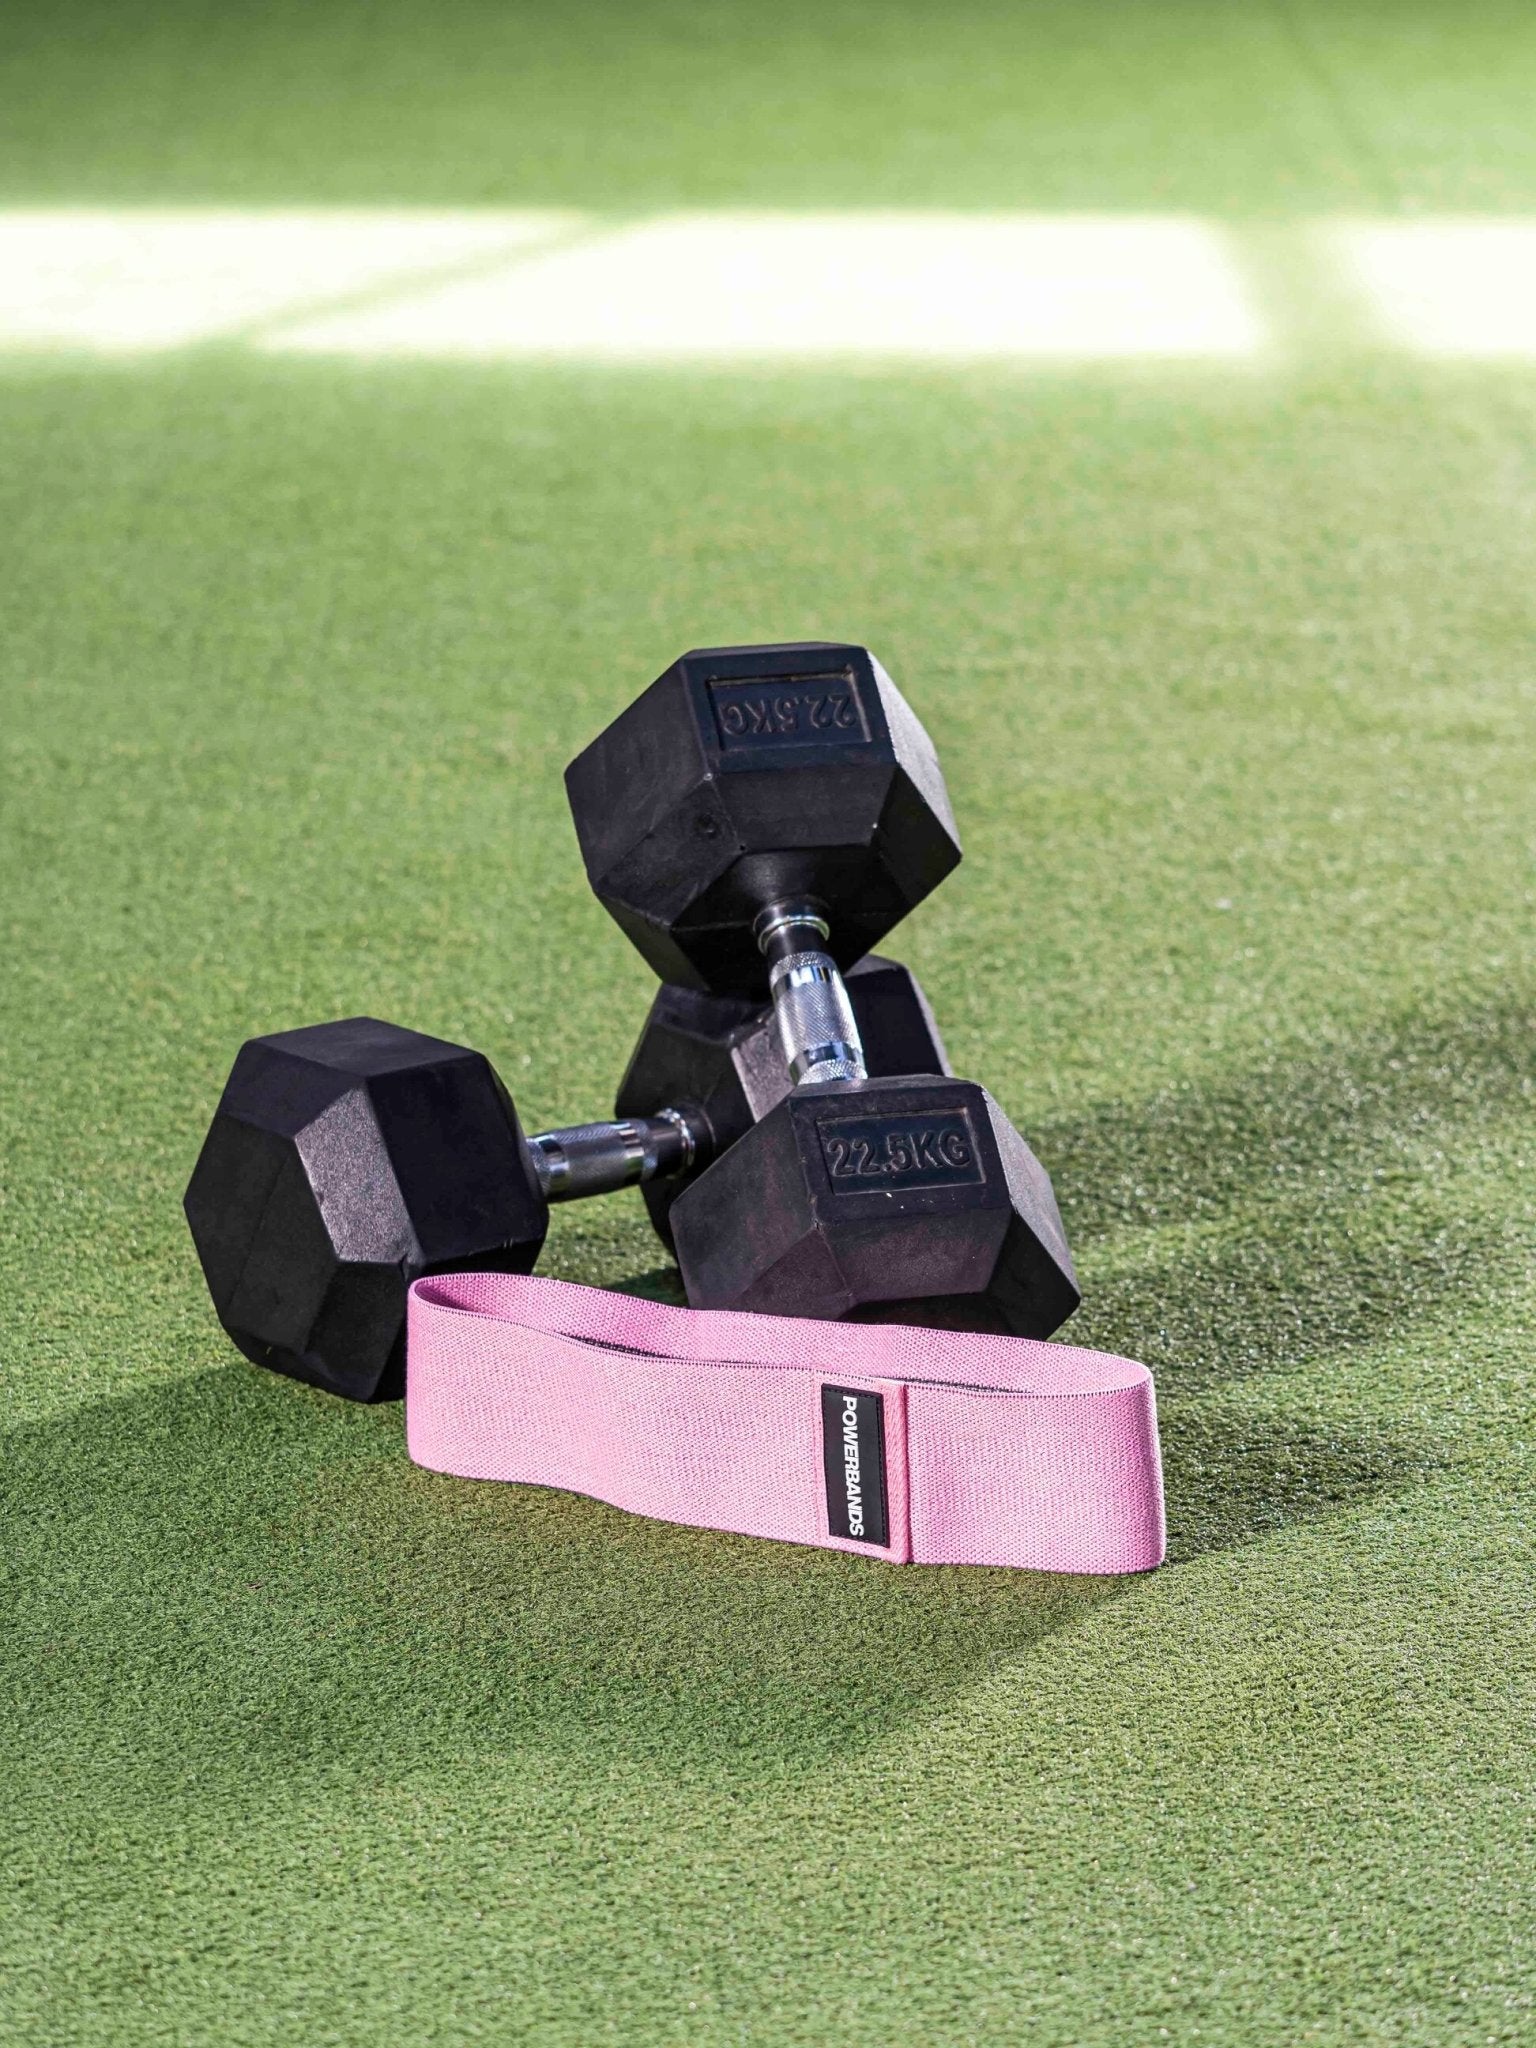 Which One Is Better, Resistance Bands or Dumbbells? - POWERBANDS®